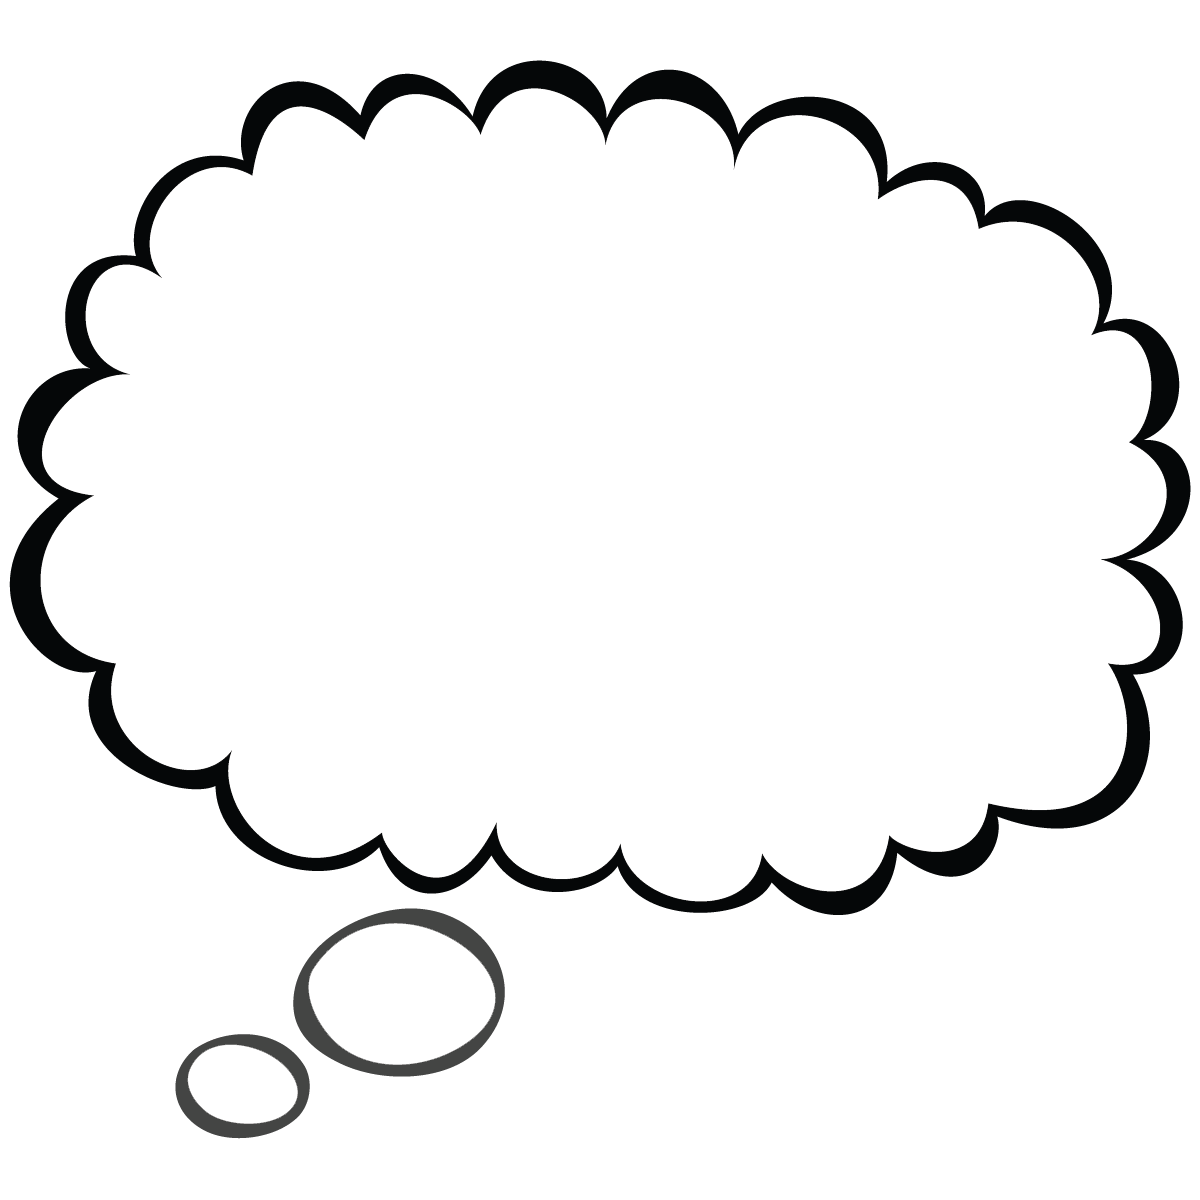 Thought bubble thought and speech bubbles clip art 2